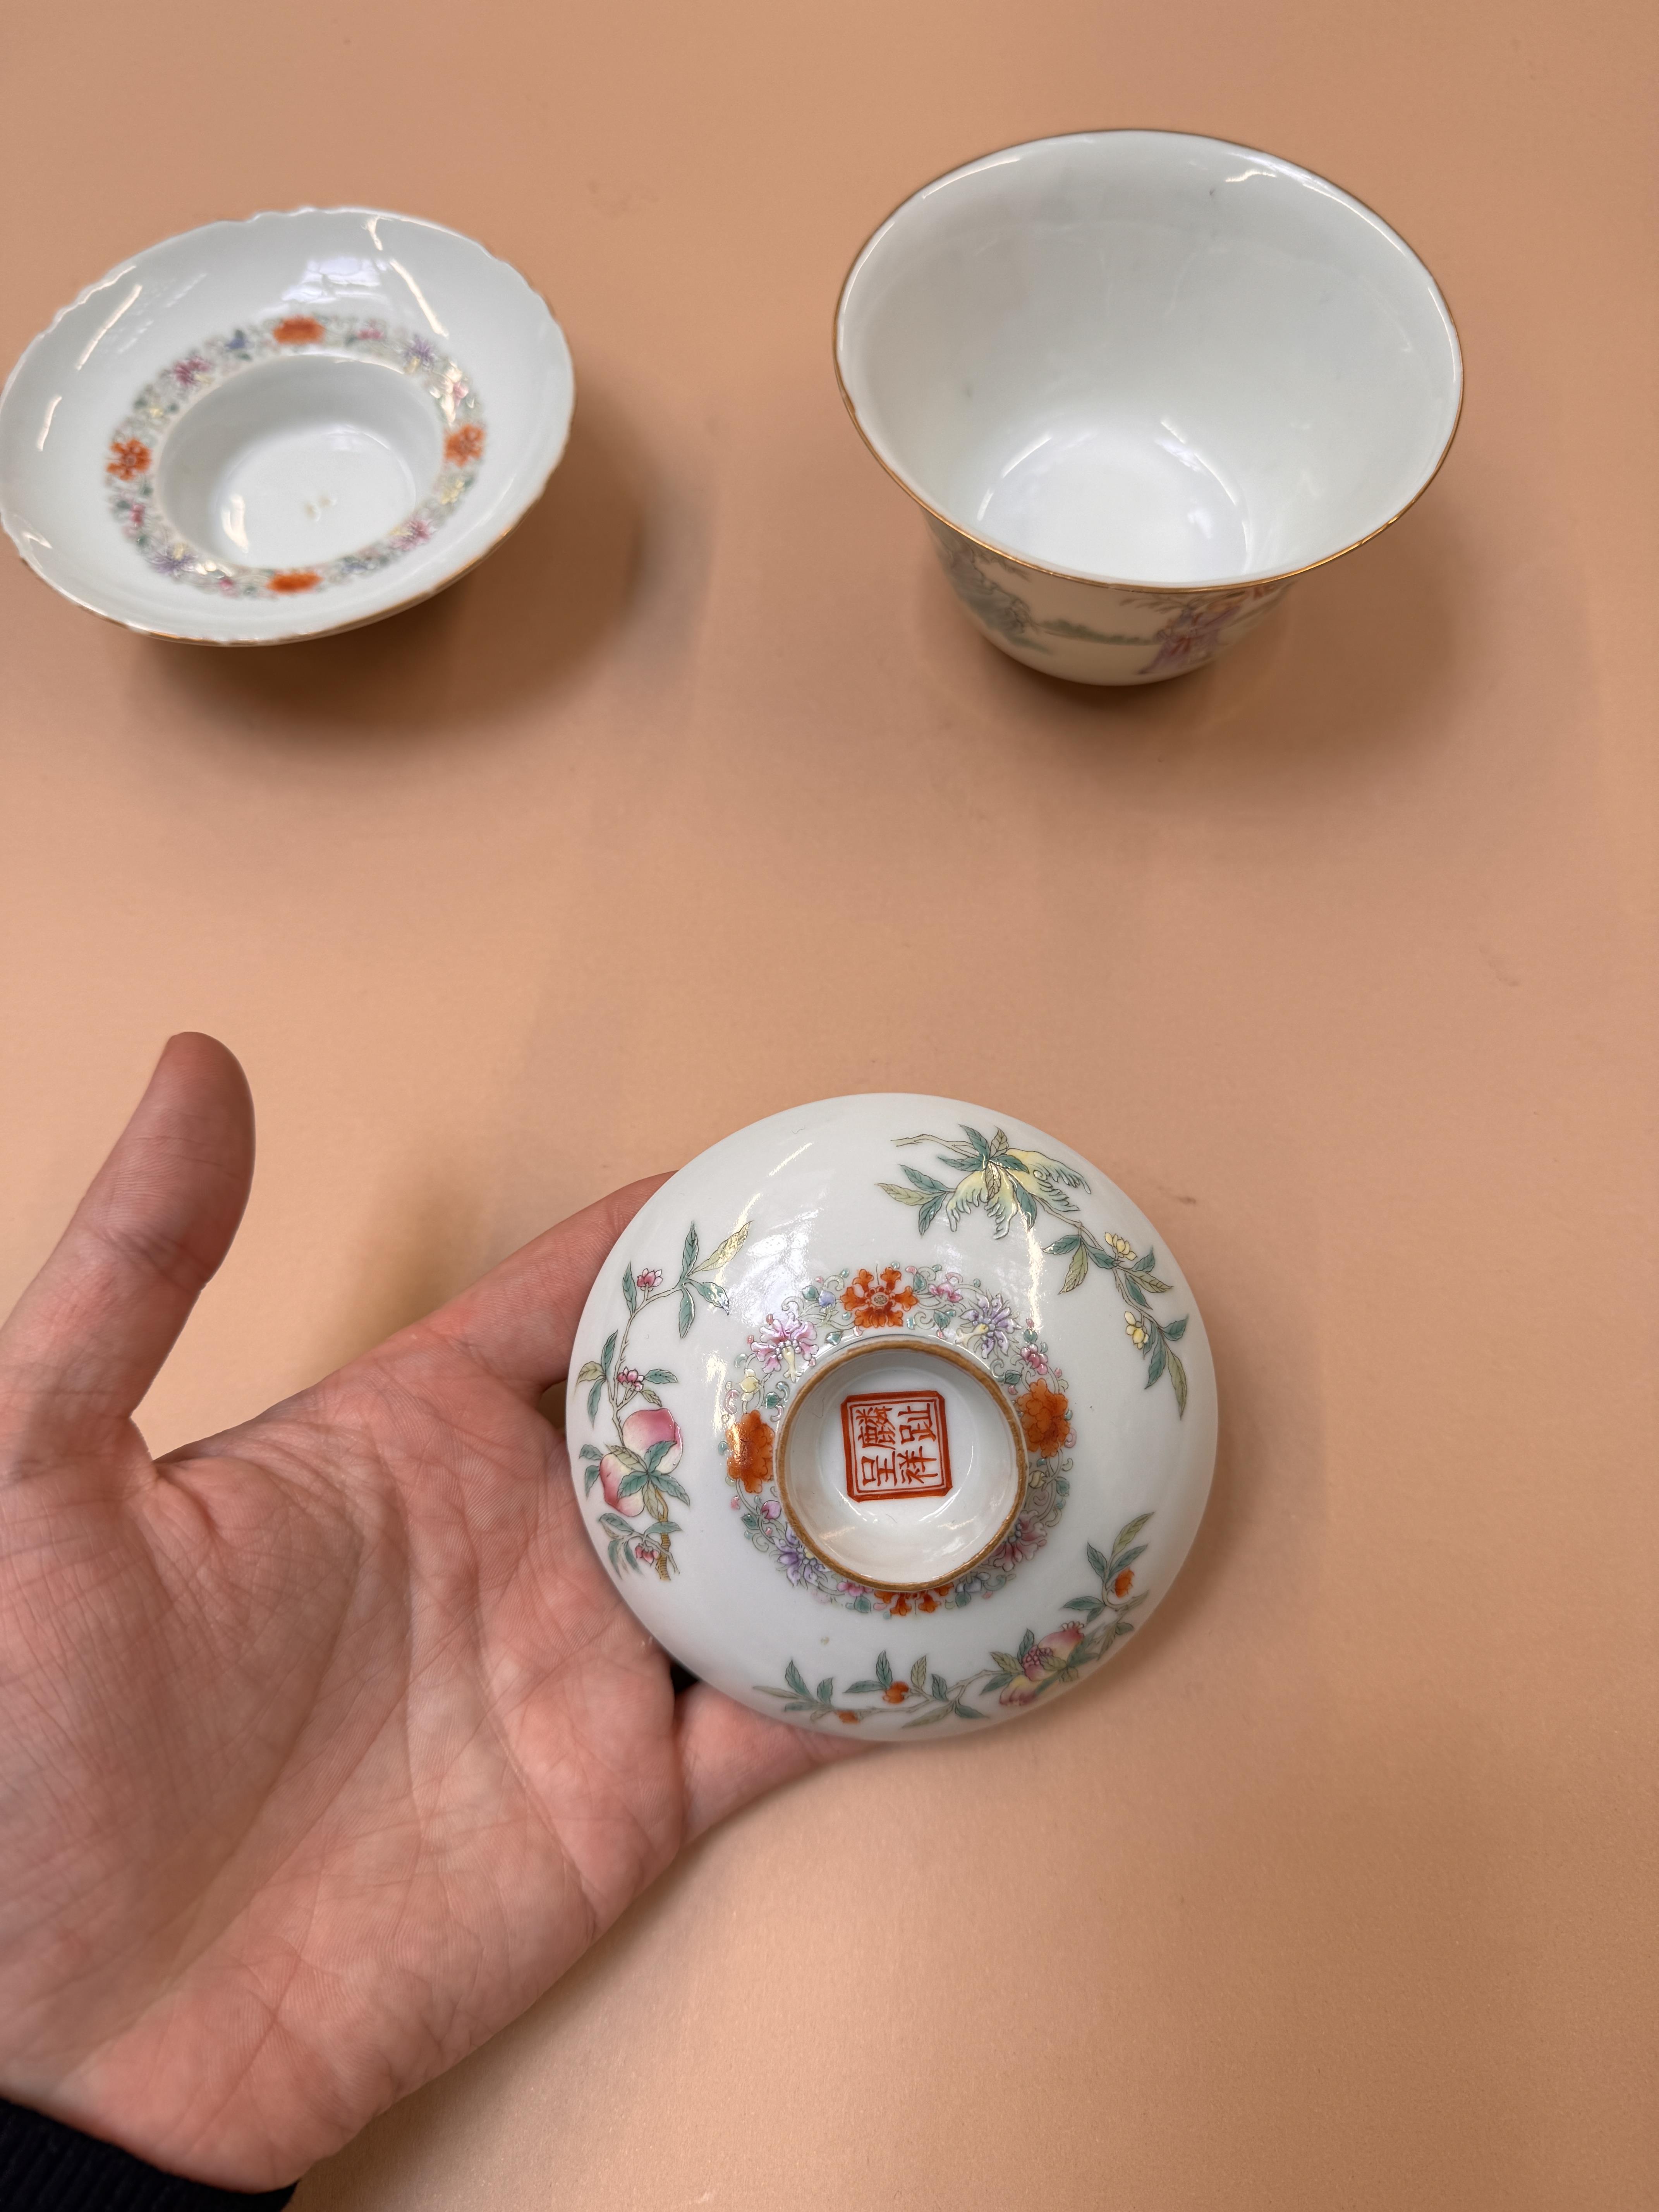 A PAIR OF CHINESE FAMILLE-ROSE CUPS, COVERS AND STANDS 民國時期 粉彩嬰戲圖蓋盌一對 《麟指呈祥》款 - Image 36 of 44